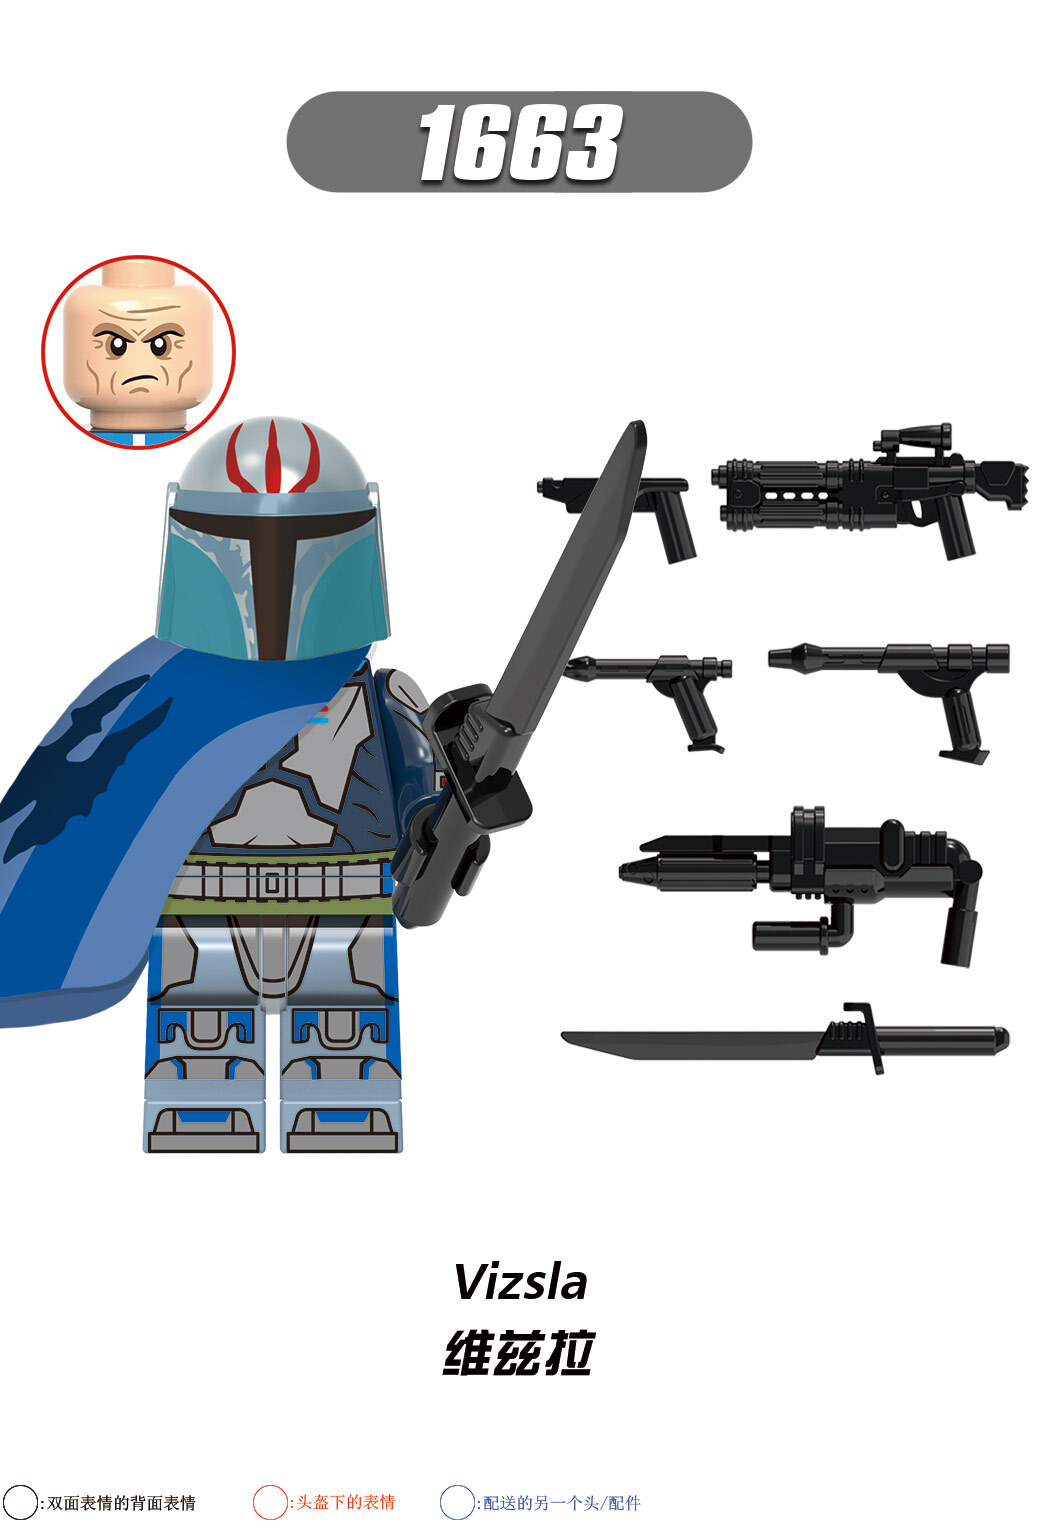 XH 1656 1657 1658 1659 1660 1661 1662 1663 X0307 Star Wars Bricks Building Blocks Movie Series Characters Action Figures Educational Toys For Children's Gifts